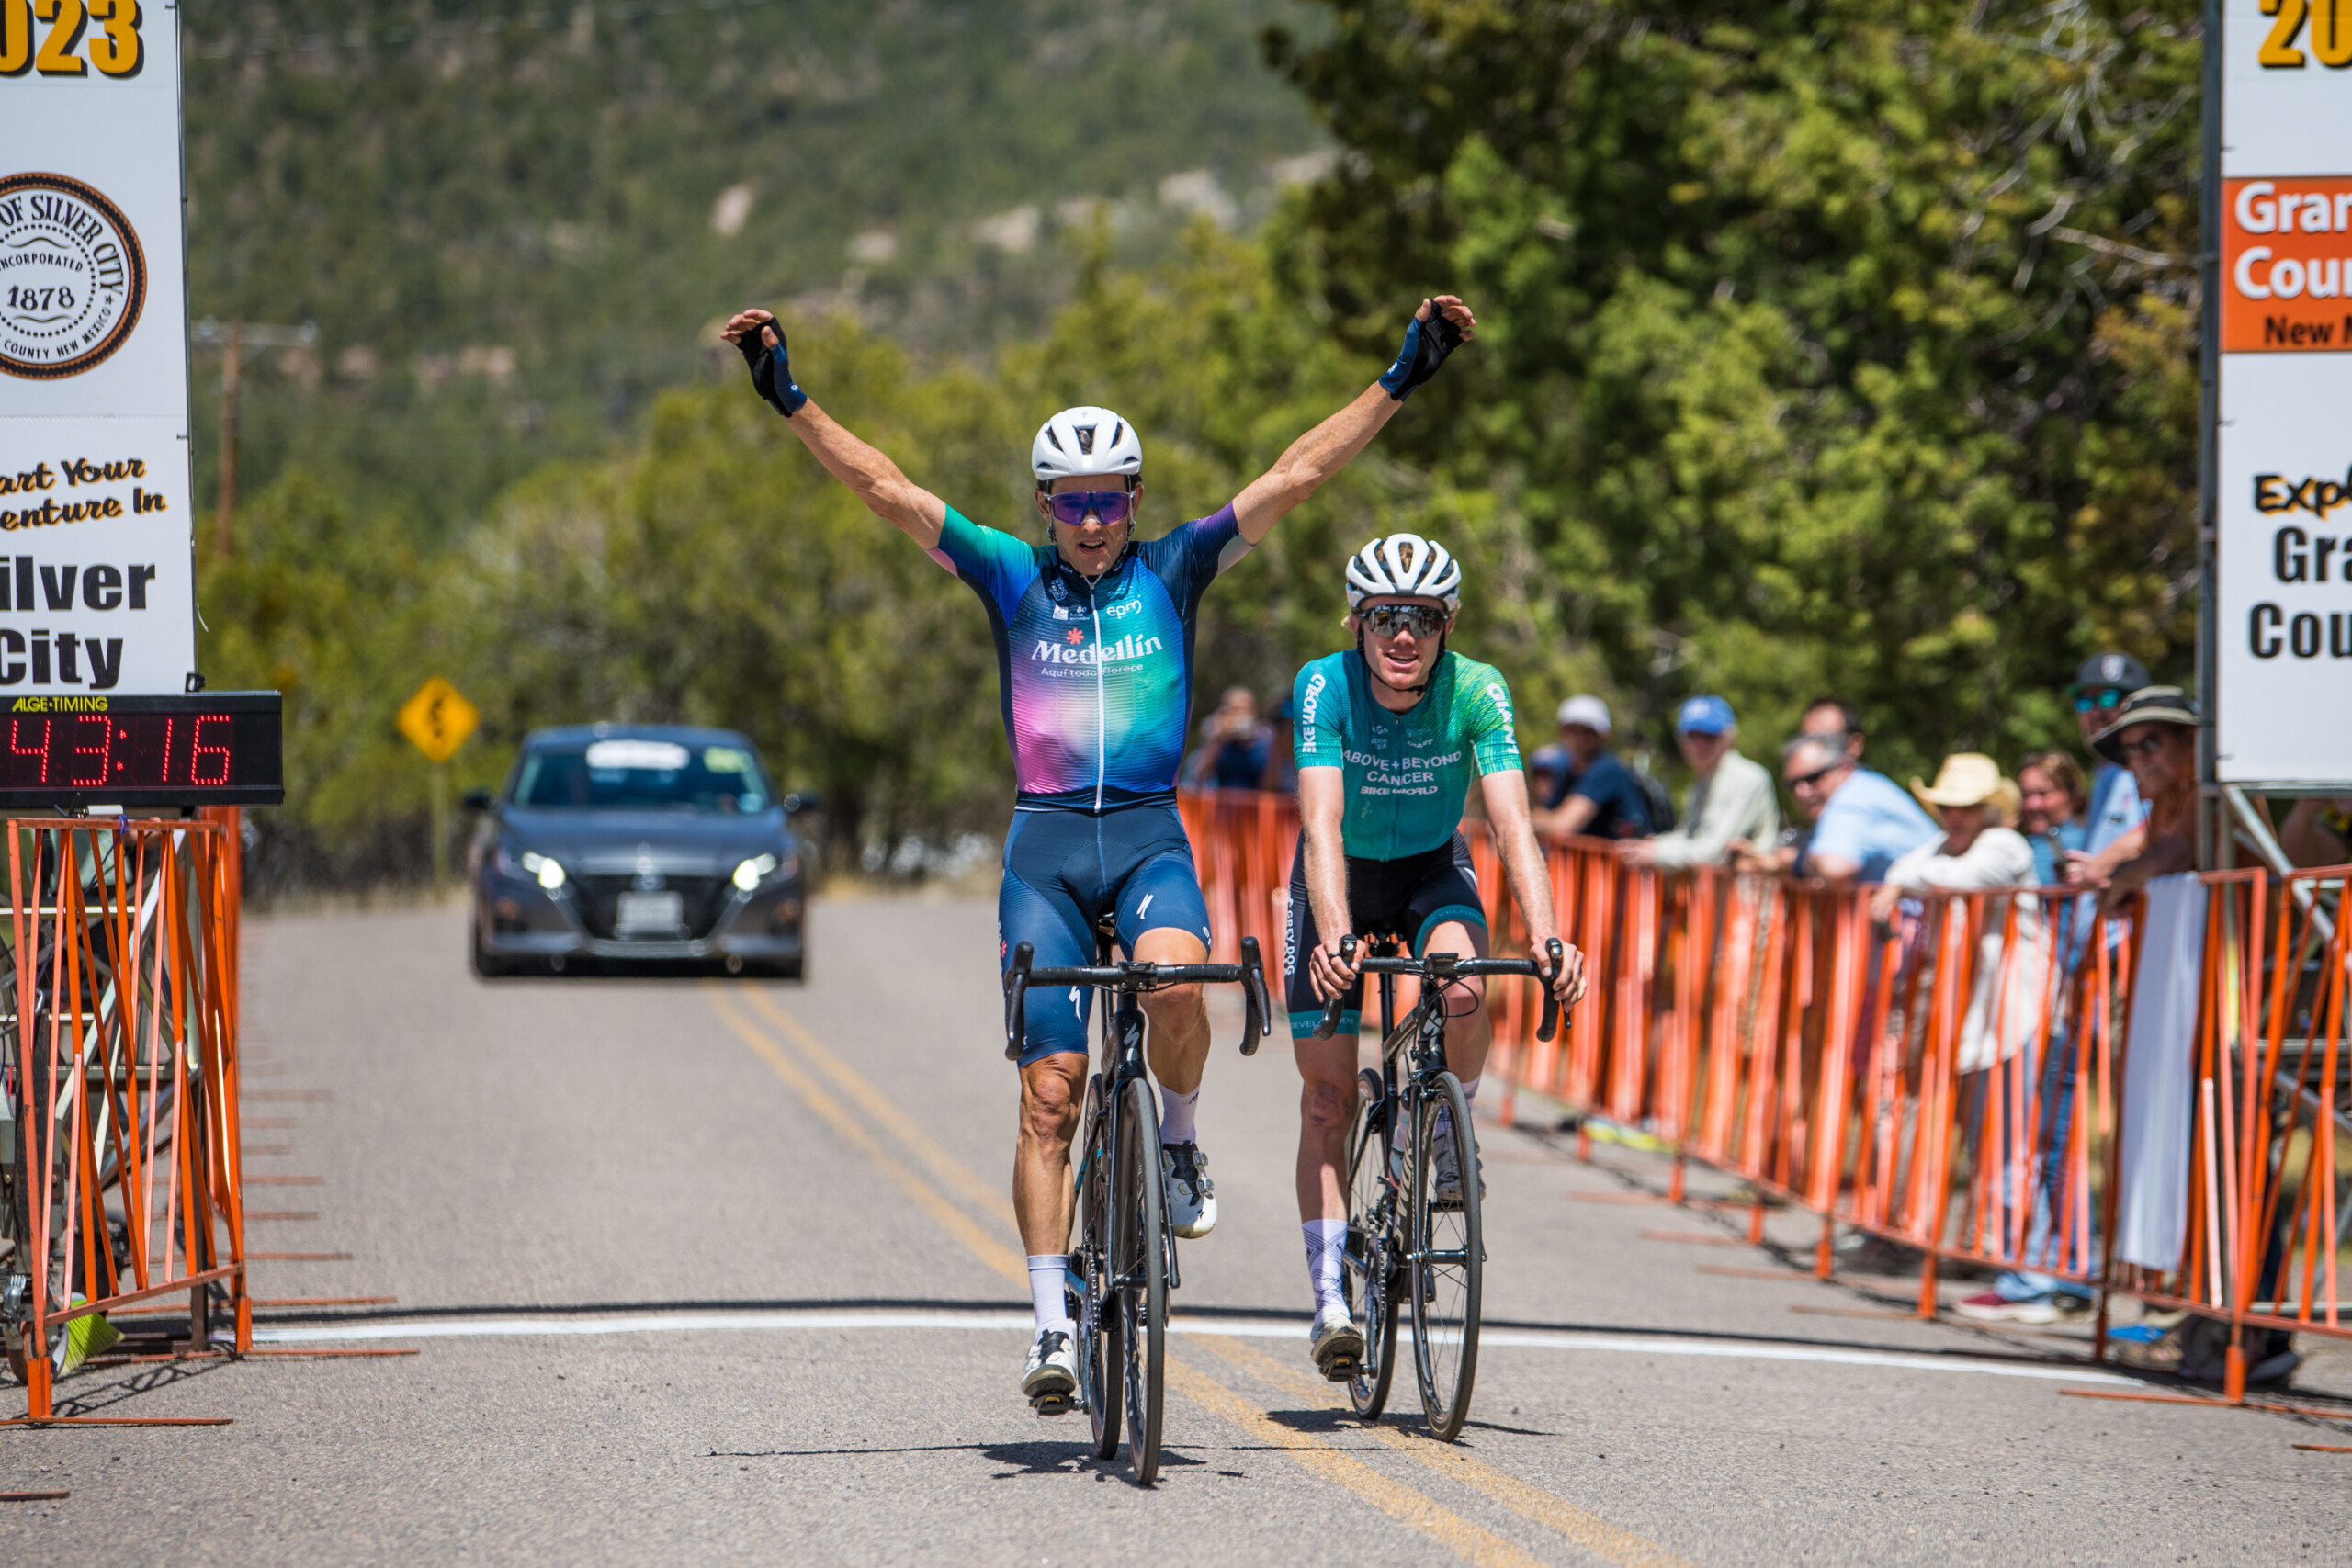 Sevilla rides up Gila Monster to victory, Hoehn wins overall Tour of the Gila